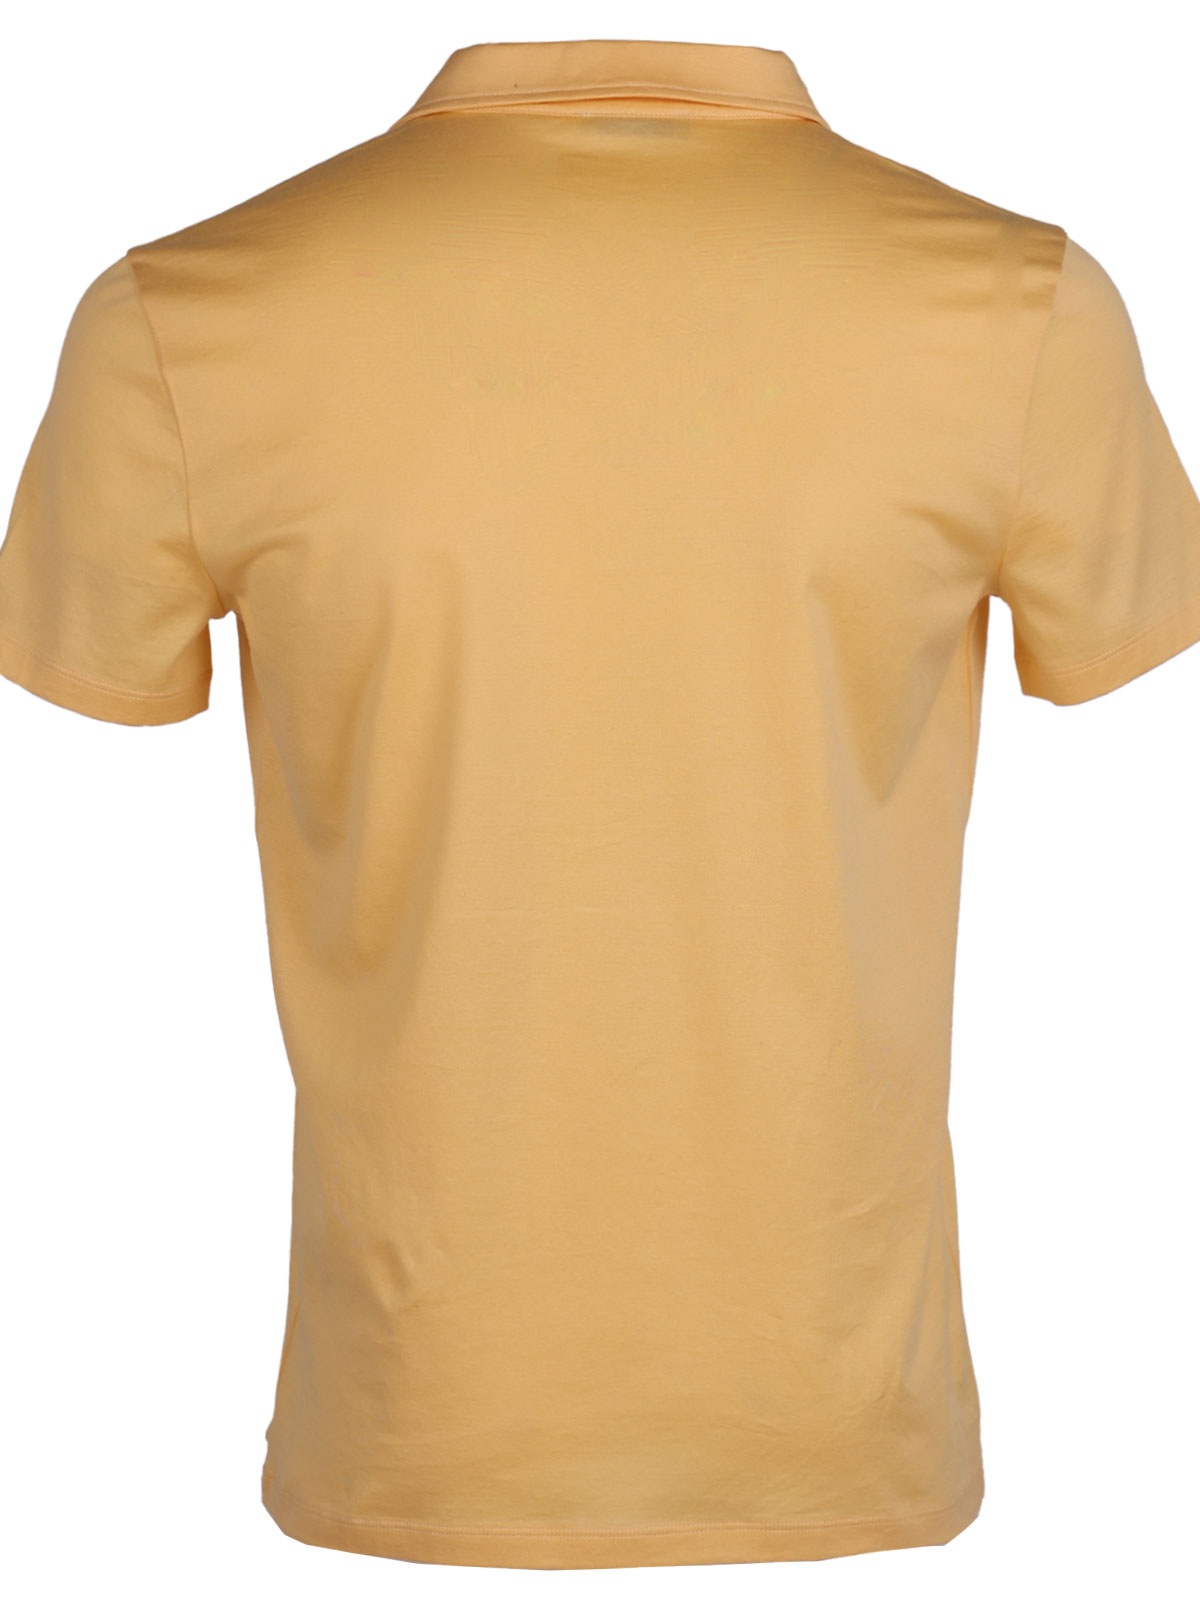 Tshirt in yellow with a collar - 94417 € 33.18 img2